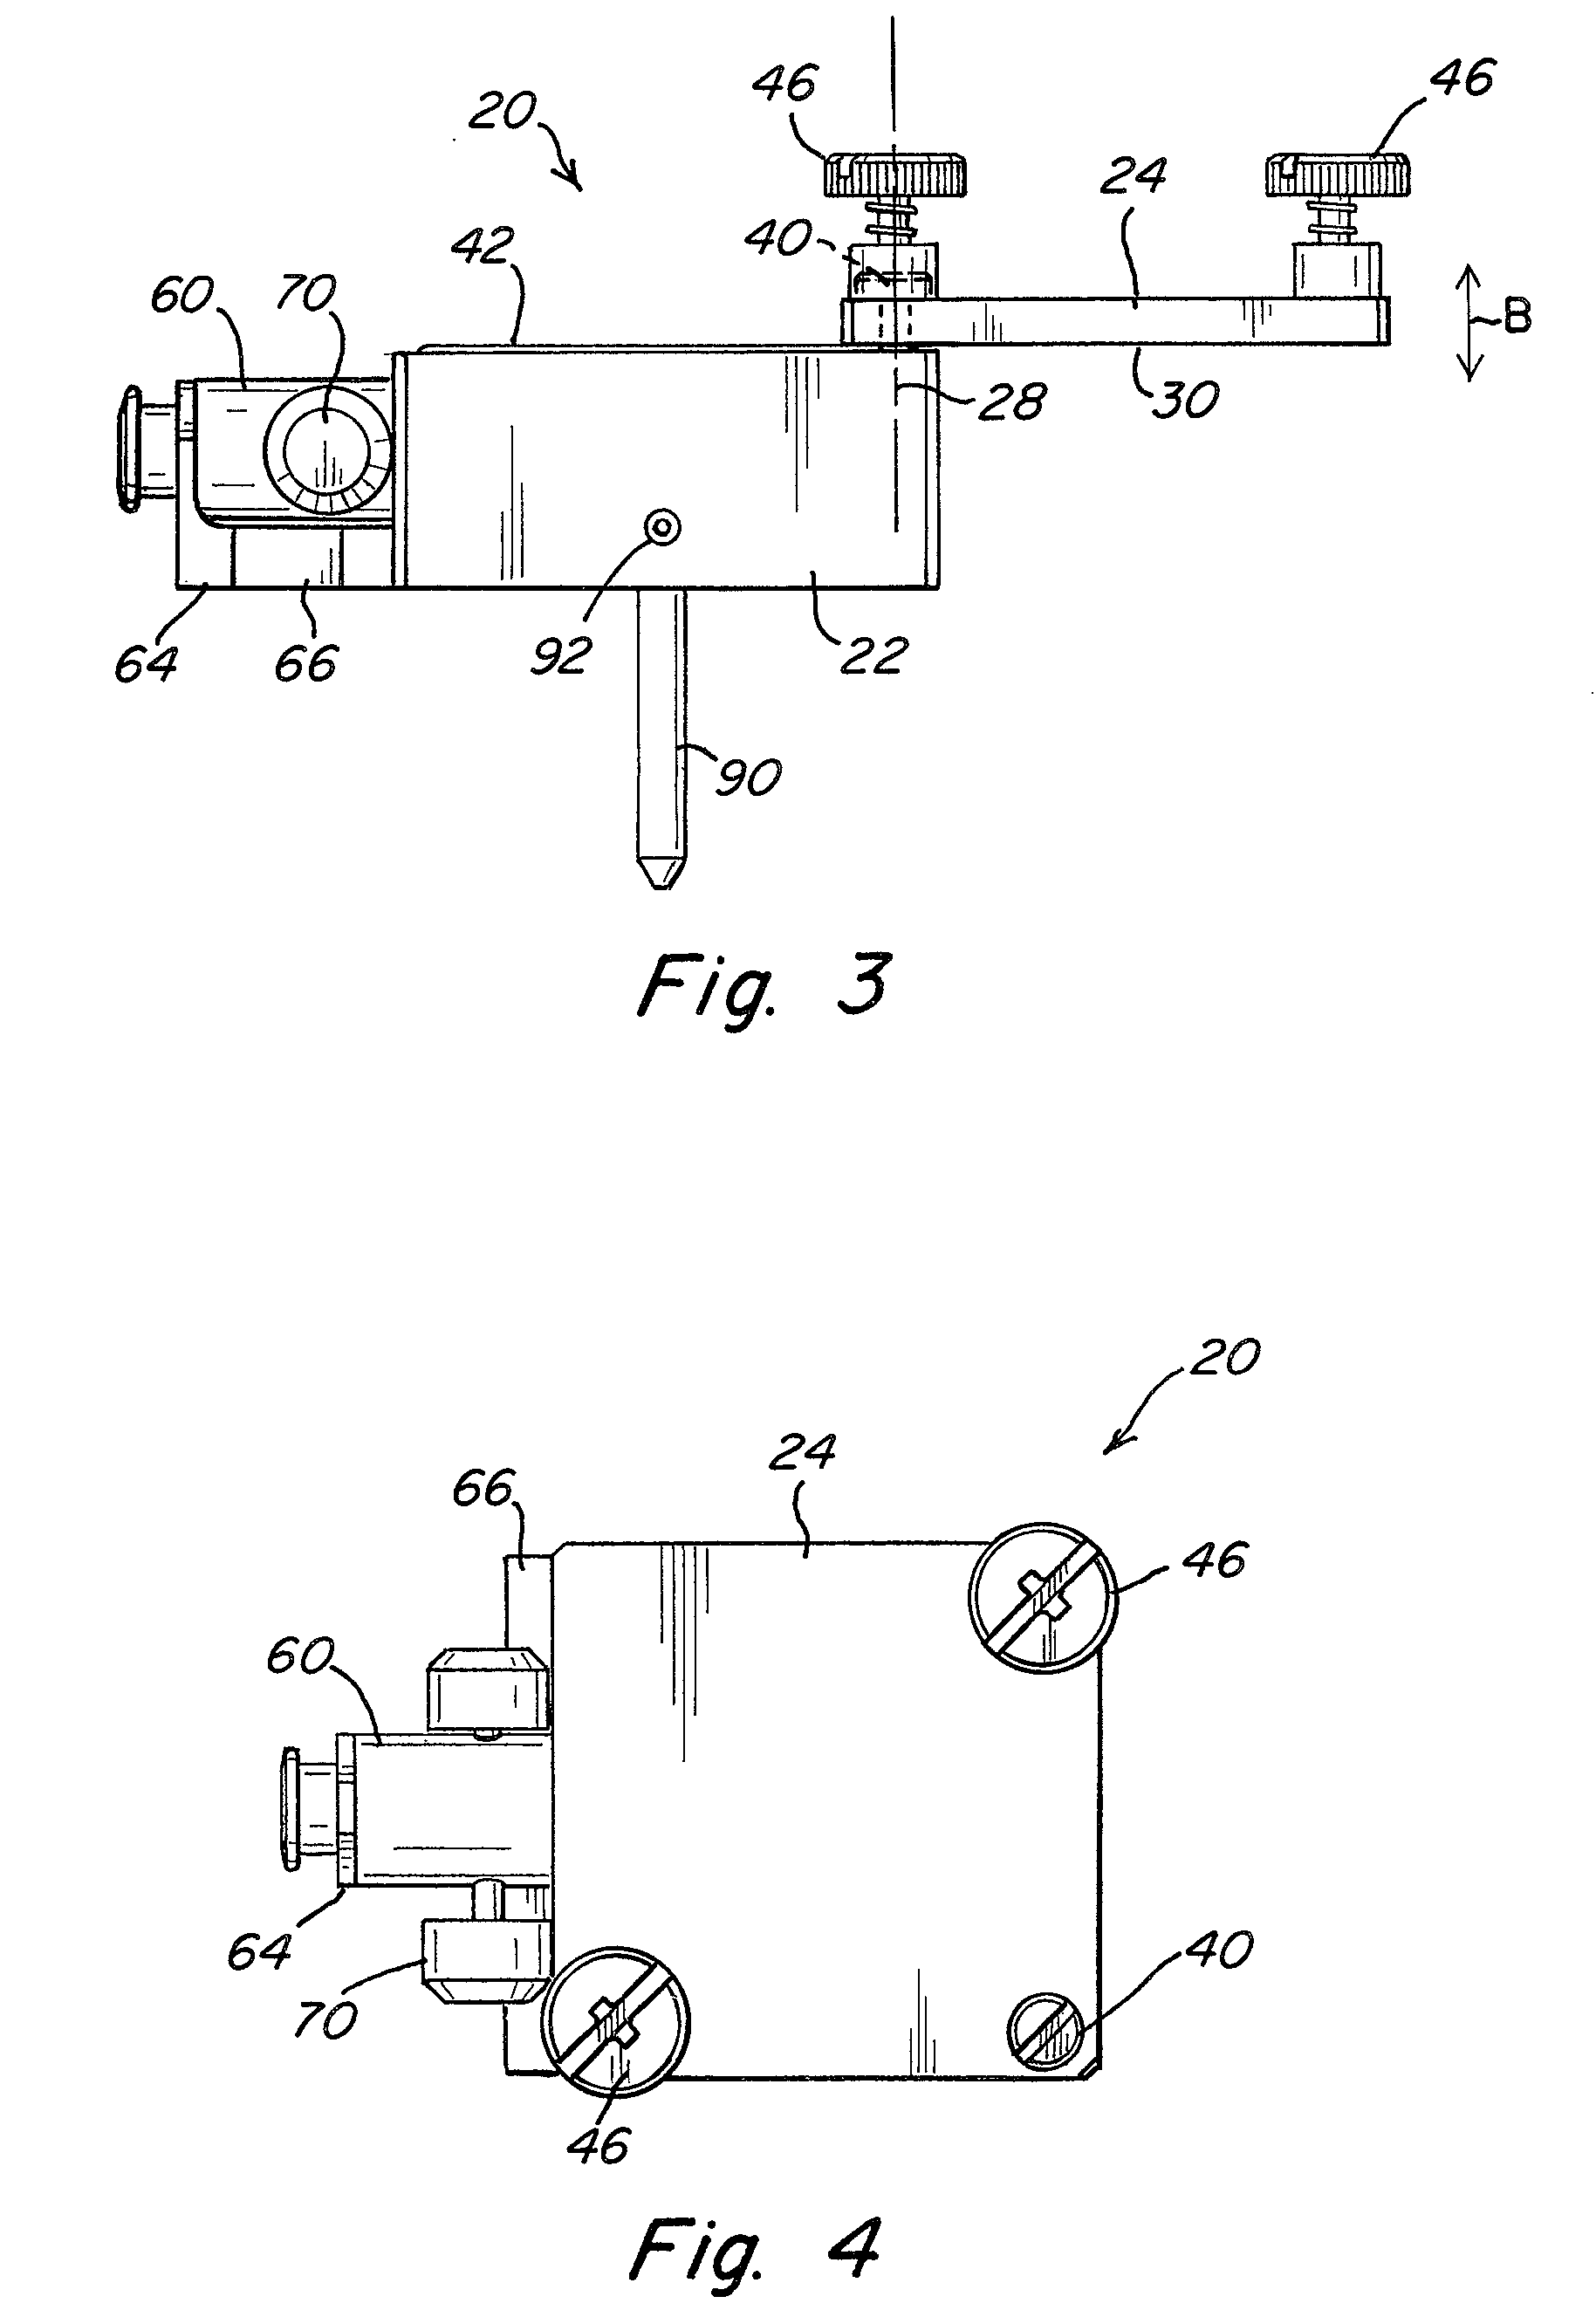 Hermetic sample holder and method for performing microanalysis under controlled atmosphere environment